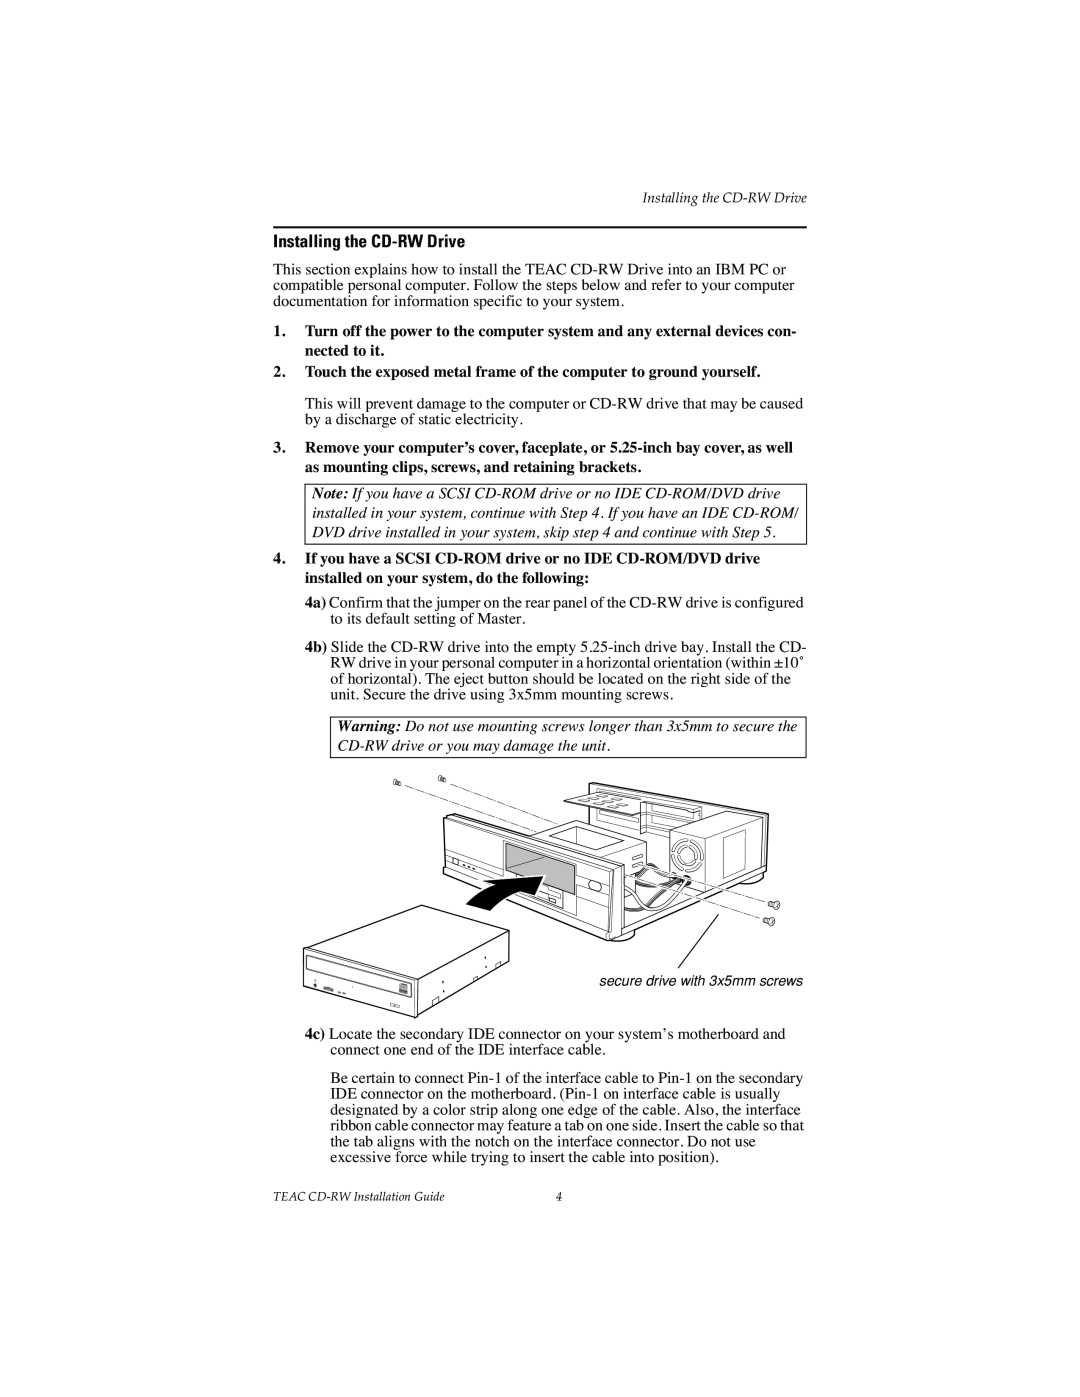 Teac CD-W58 E specifications Installing the CD-RWDrive 